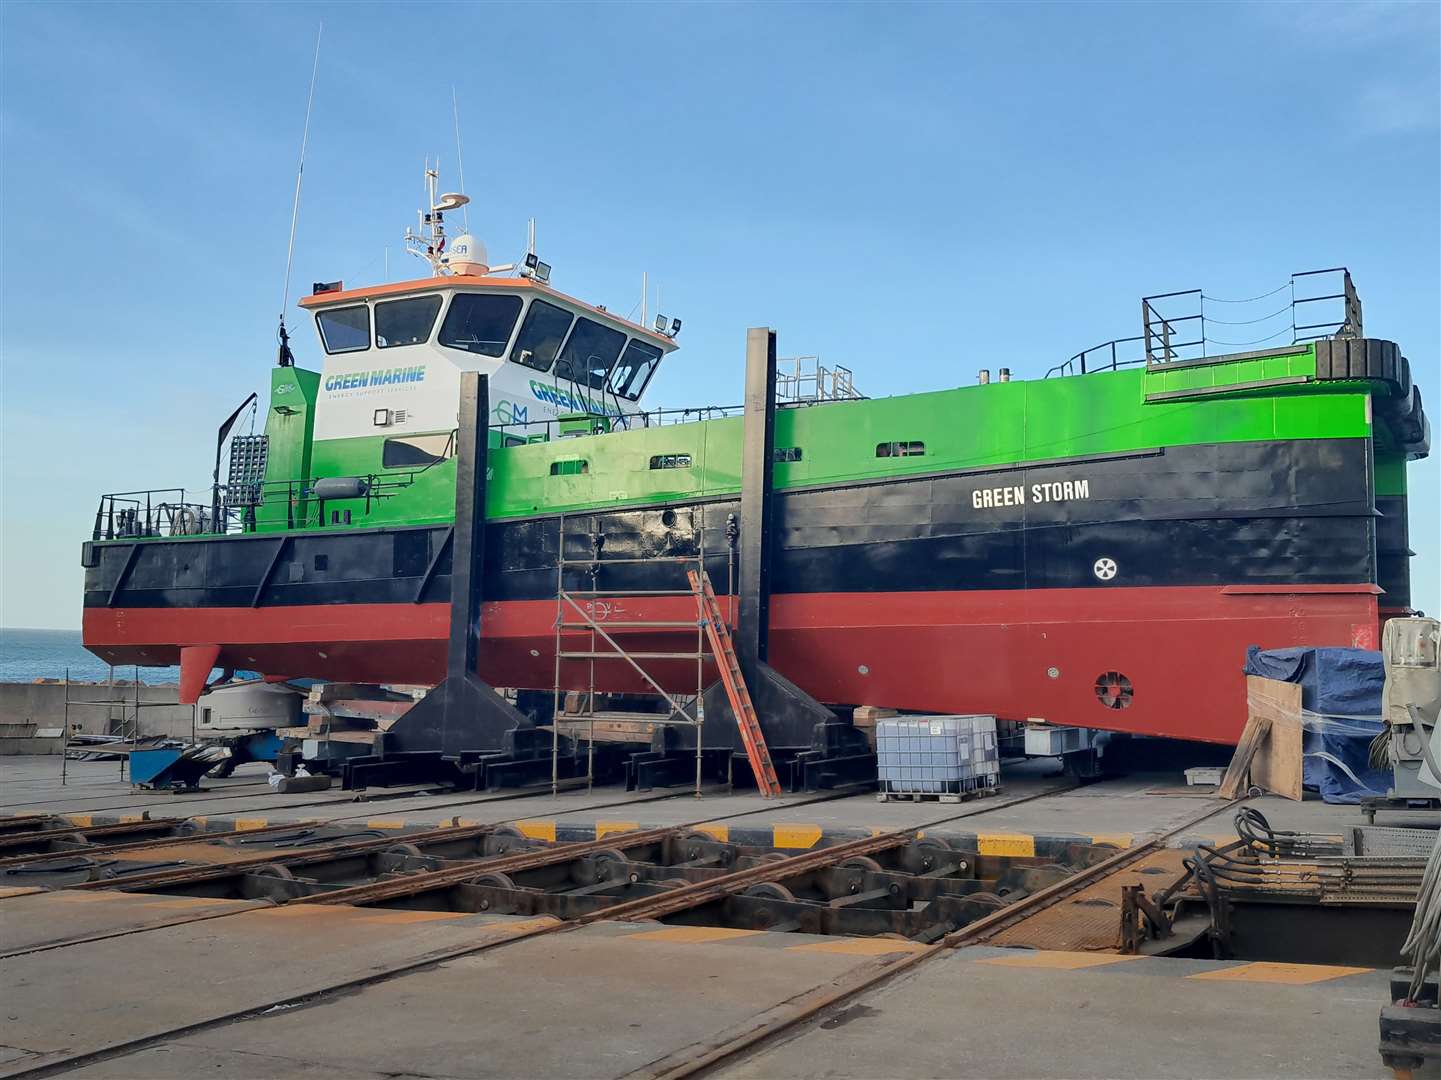 The Green Storm was the first vessel over 10 metres to use the upgraded facility.